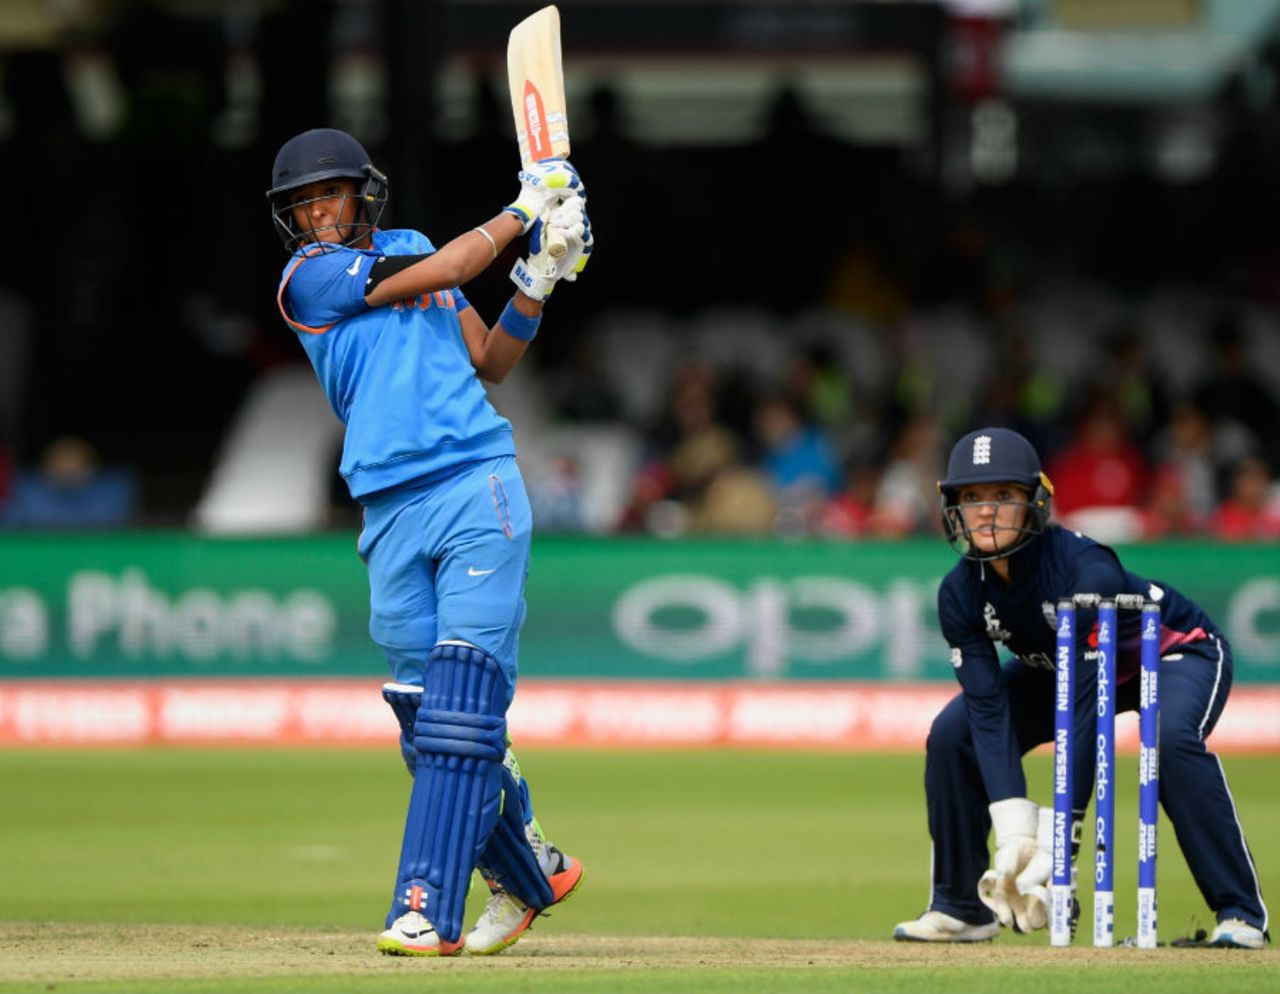 Harmanpreet Kaur biffs one over the infield, England v India, Women's World Cup final, Lord's, July 23, 2017